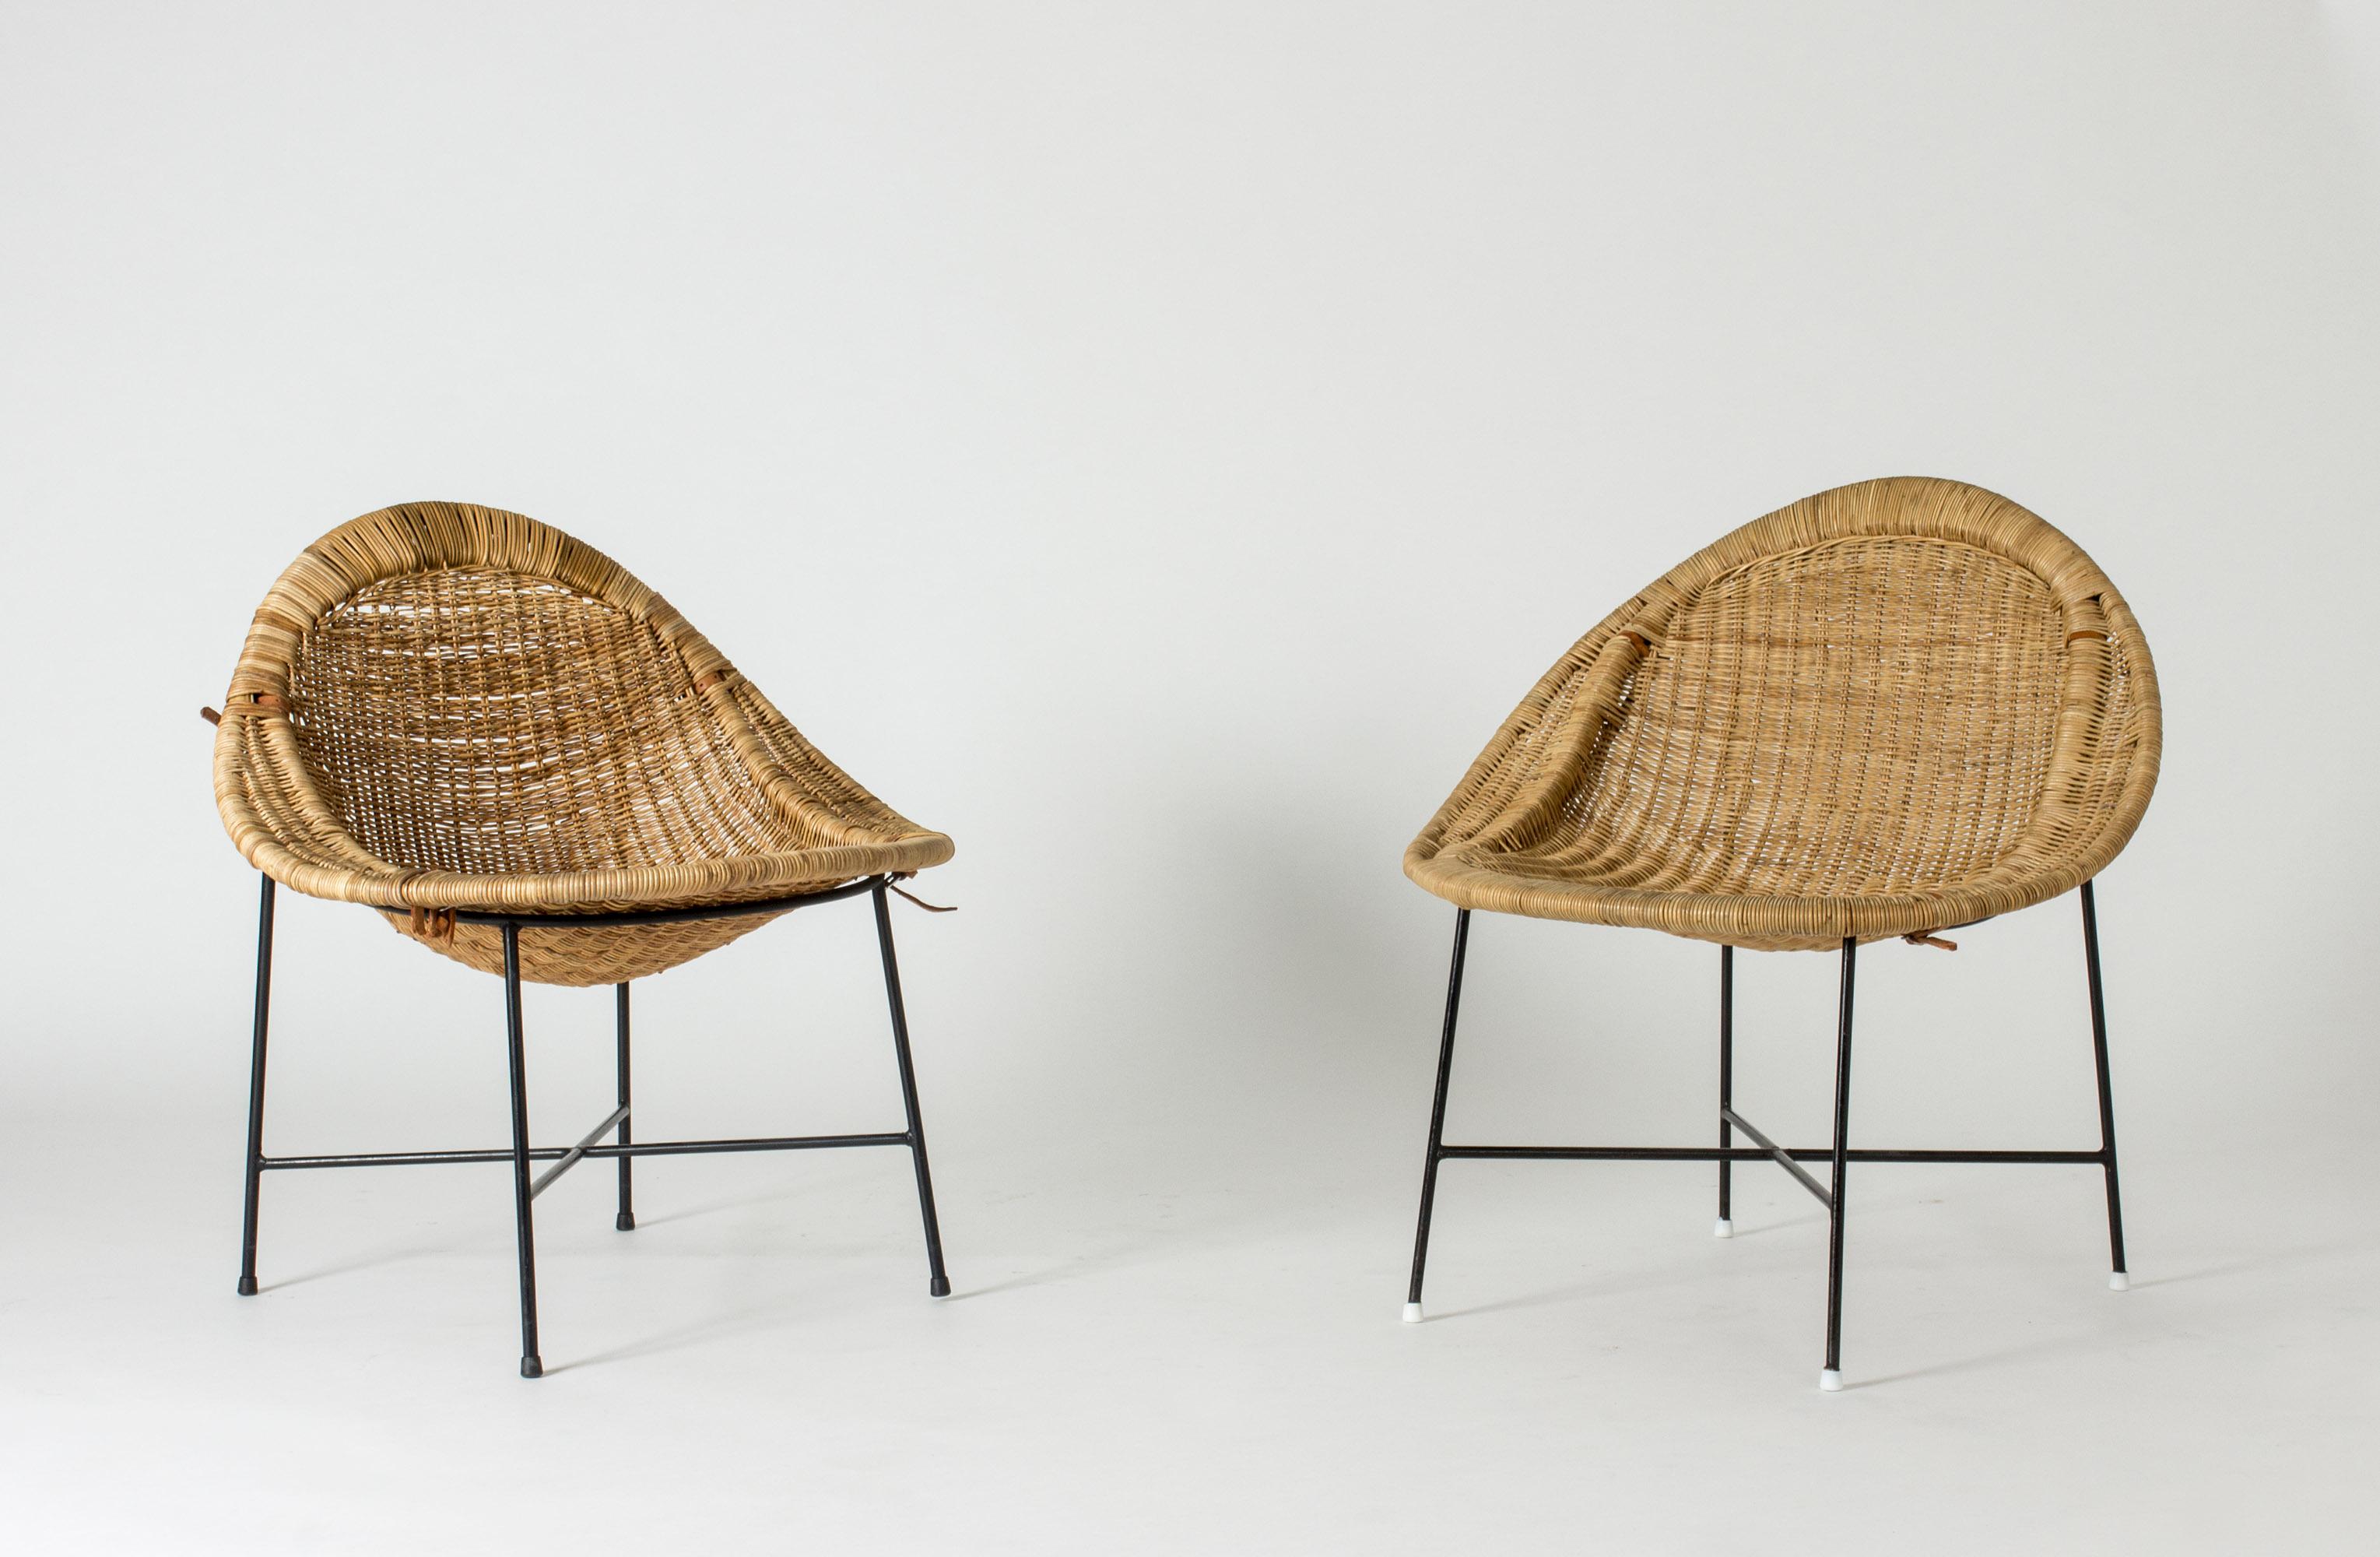 Pair of “Lilla Kraal” lounge chairs by Kerstin Hörlin-Holmquist, made from wreathed rattan on lacquered metal bases. One of the chairs is mended on the back, see the last image. 

The design is inspired by traditional African village enclosures